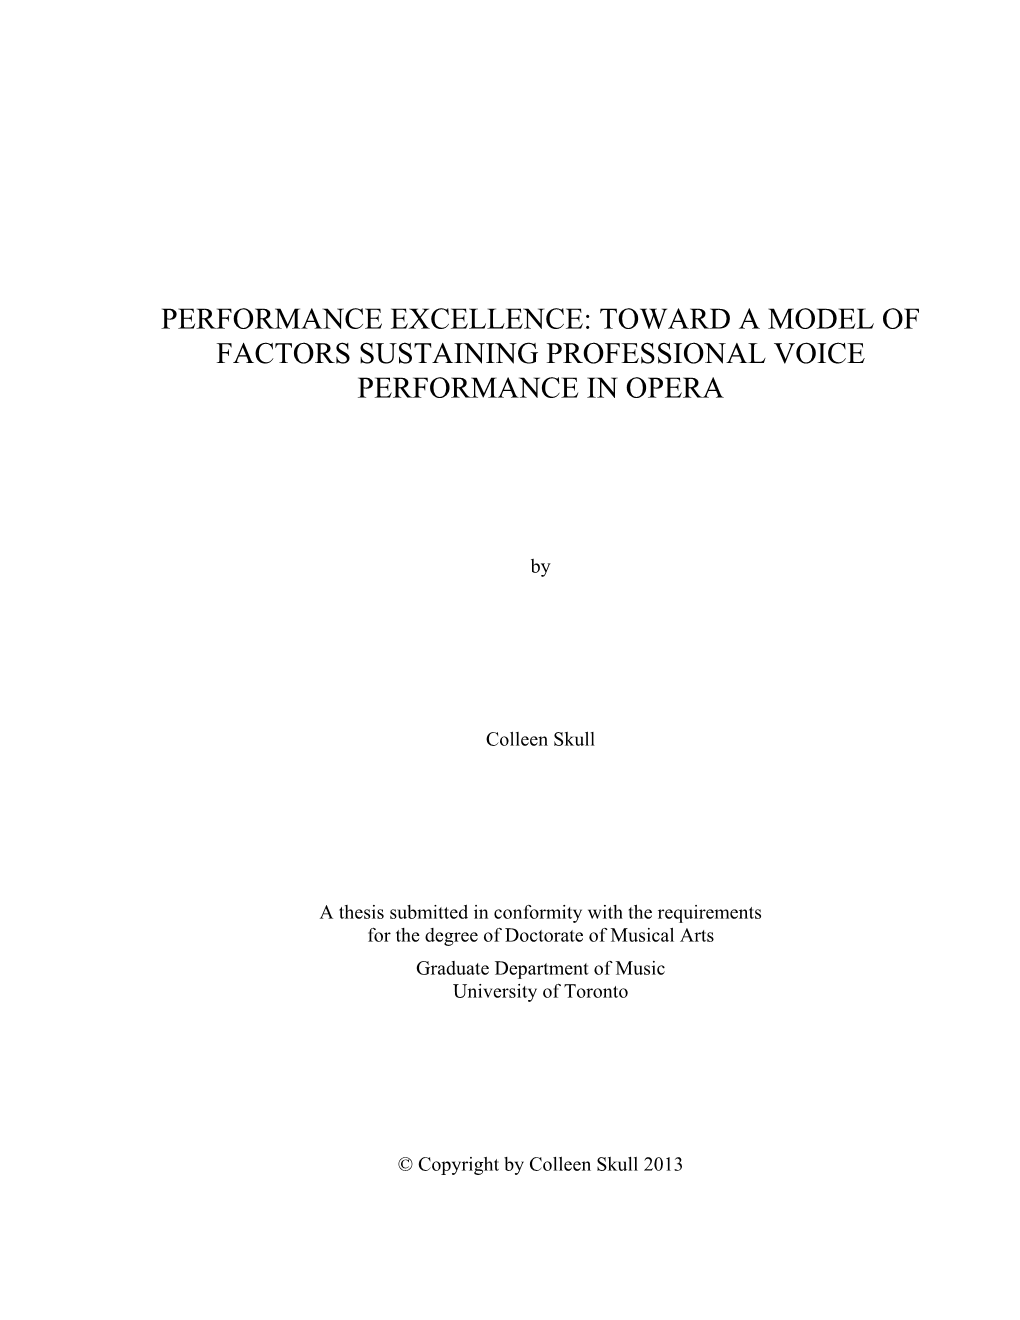 Performance Excellence: Toward a Model of Factors Sustaining Professional Voice Performance in Opera